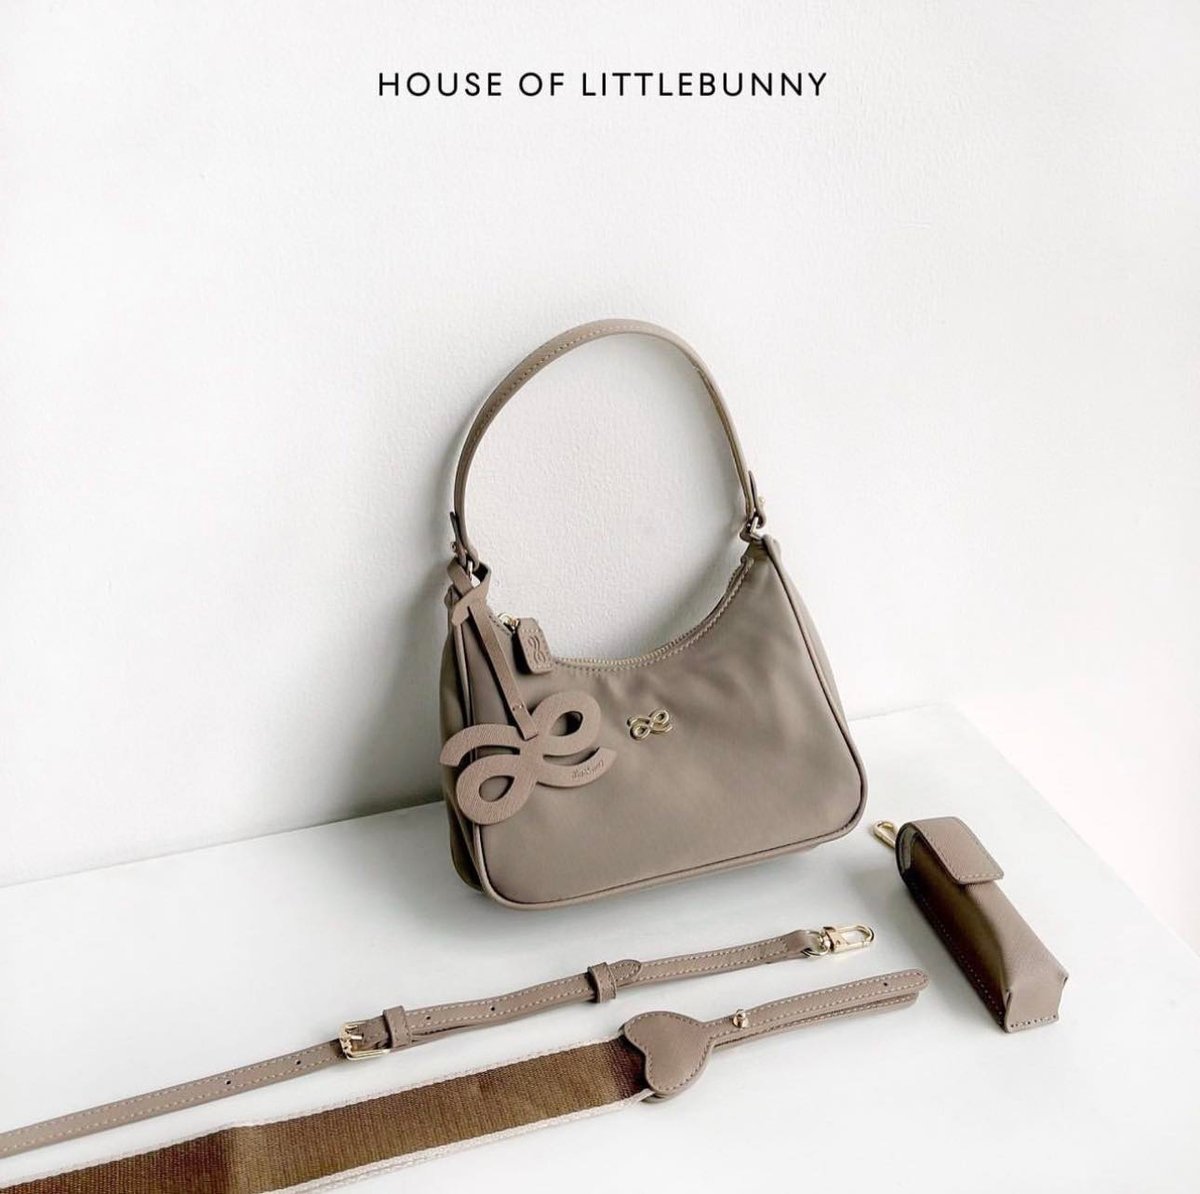 HOUSE OF LITTLE BUNNY BENTO IN BLACK GENUINE LEATHER, Women's